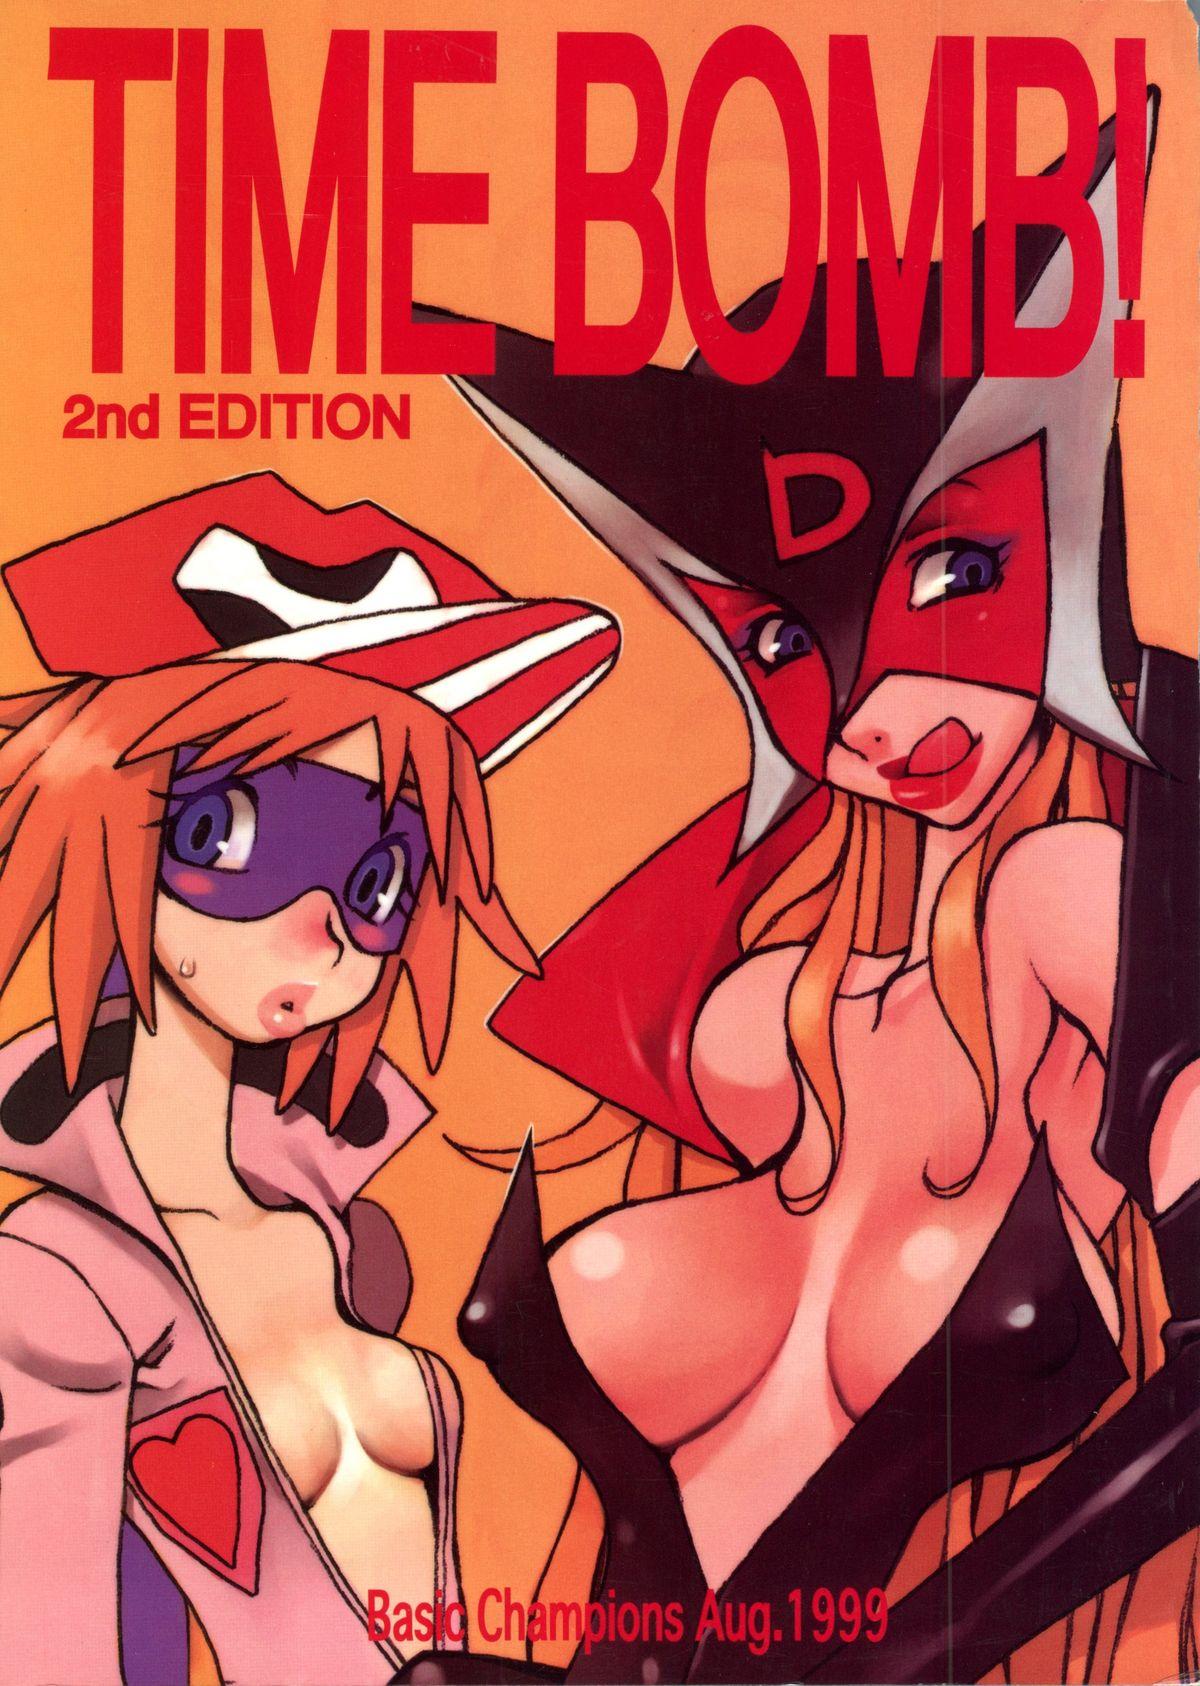 Oldvsyoung TIME BOMB! 2nd Edition - Yatterman Skinny - Page 1